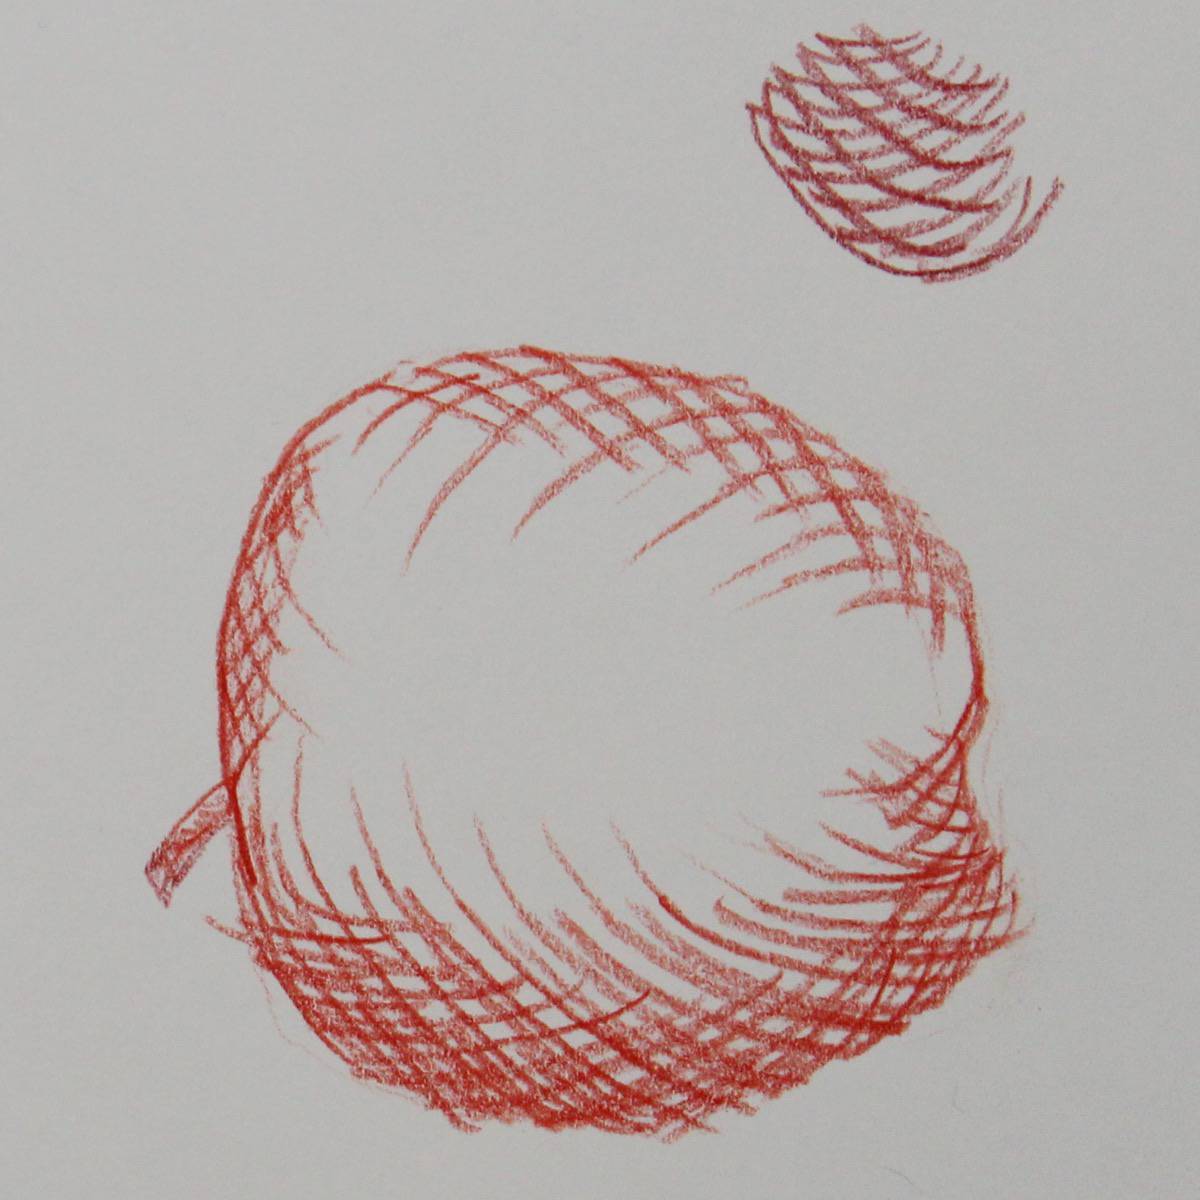 Red colored pencil drawing of an apple with contour hatching to create volume and dimension.